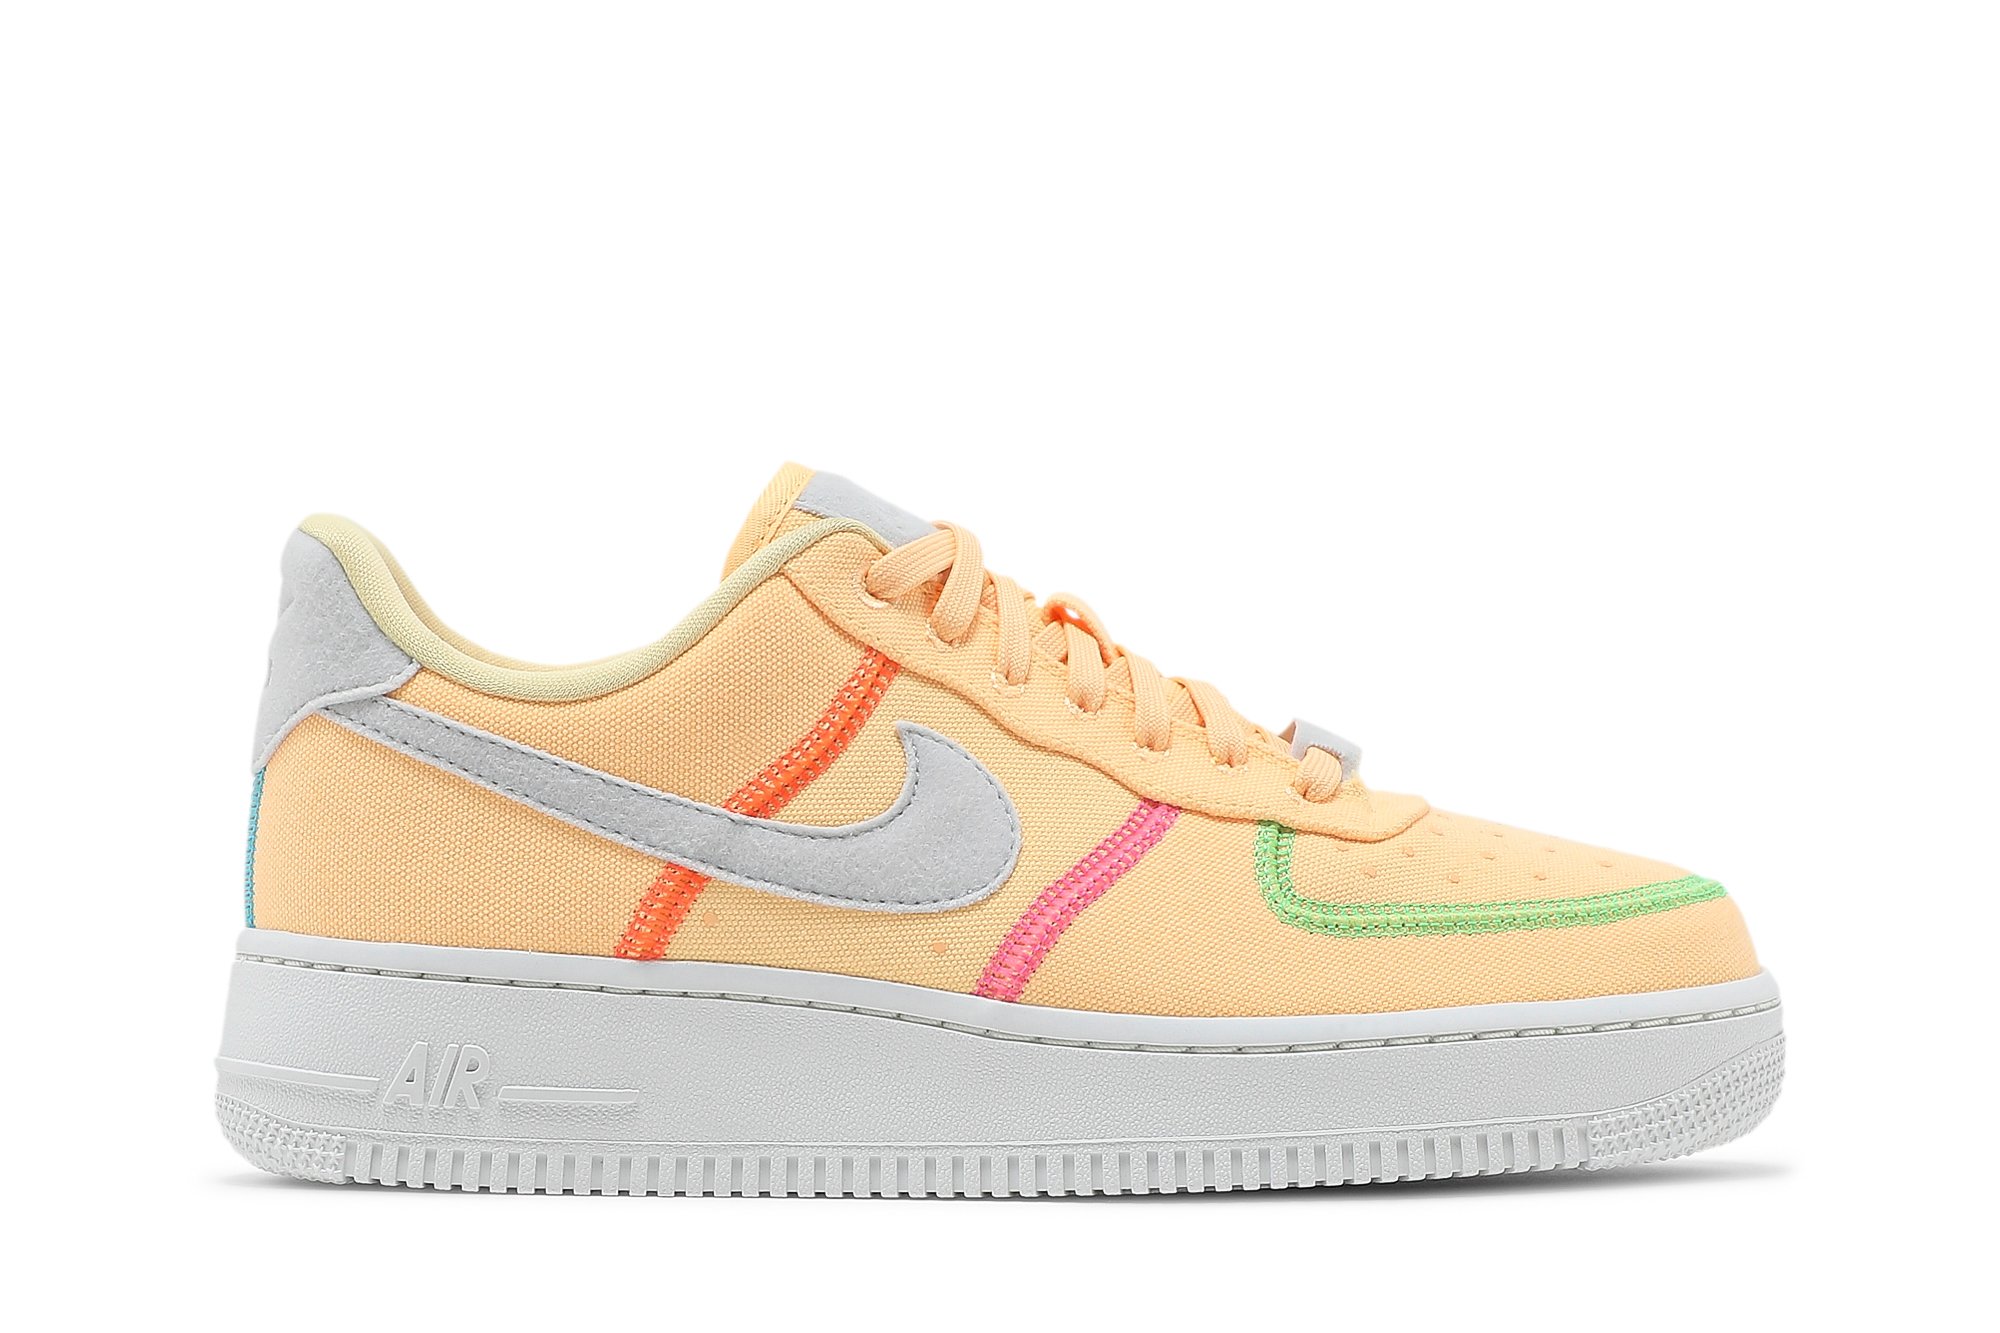 Buy Wmns Air Force 1 '07 Low LX 'Stitched Canvas - Melon Tint